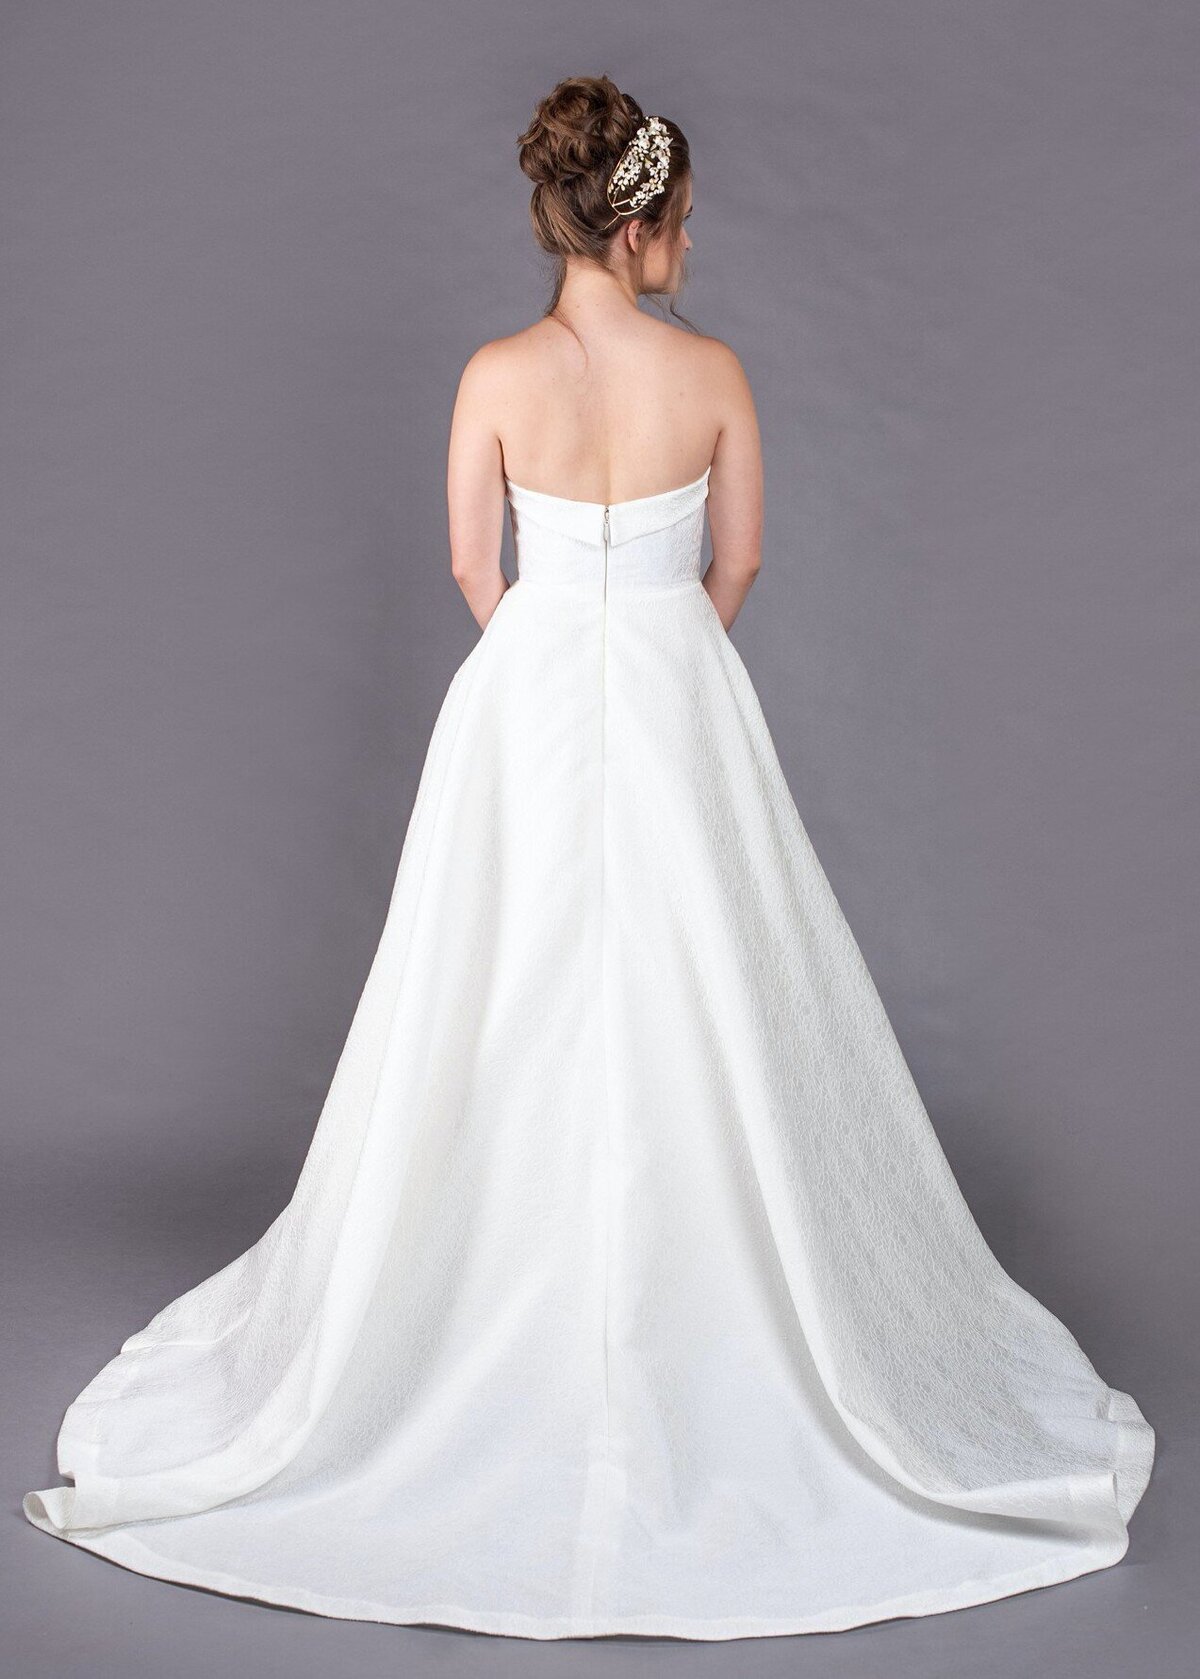 The back of the textured wedding dress is simple with its strapless neckline and shorter train.